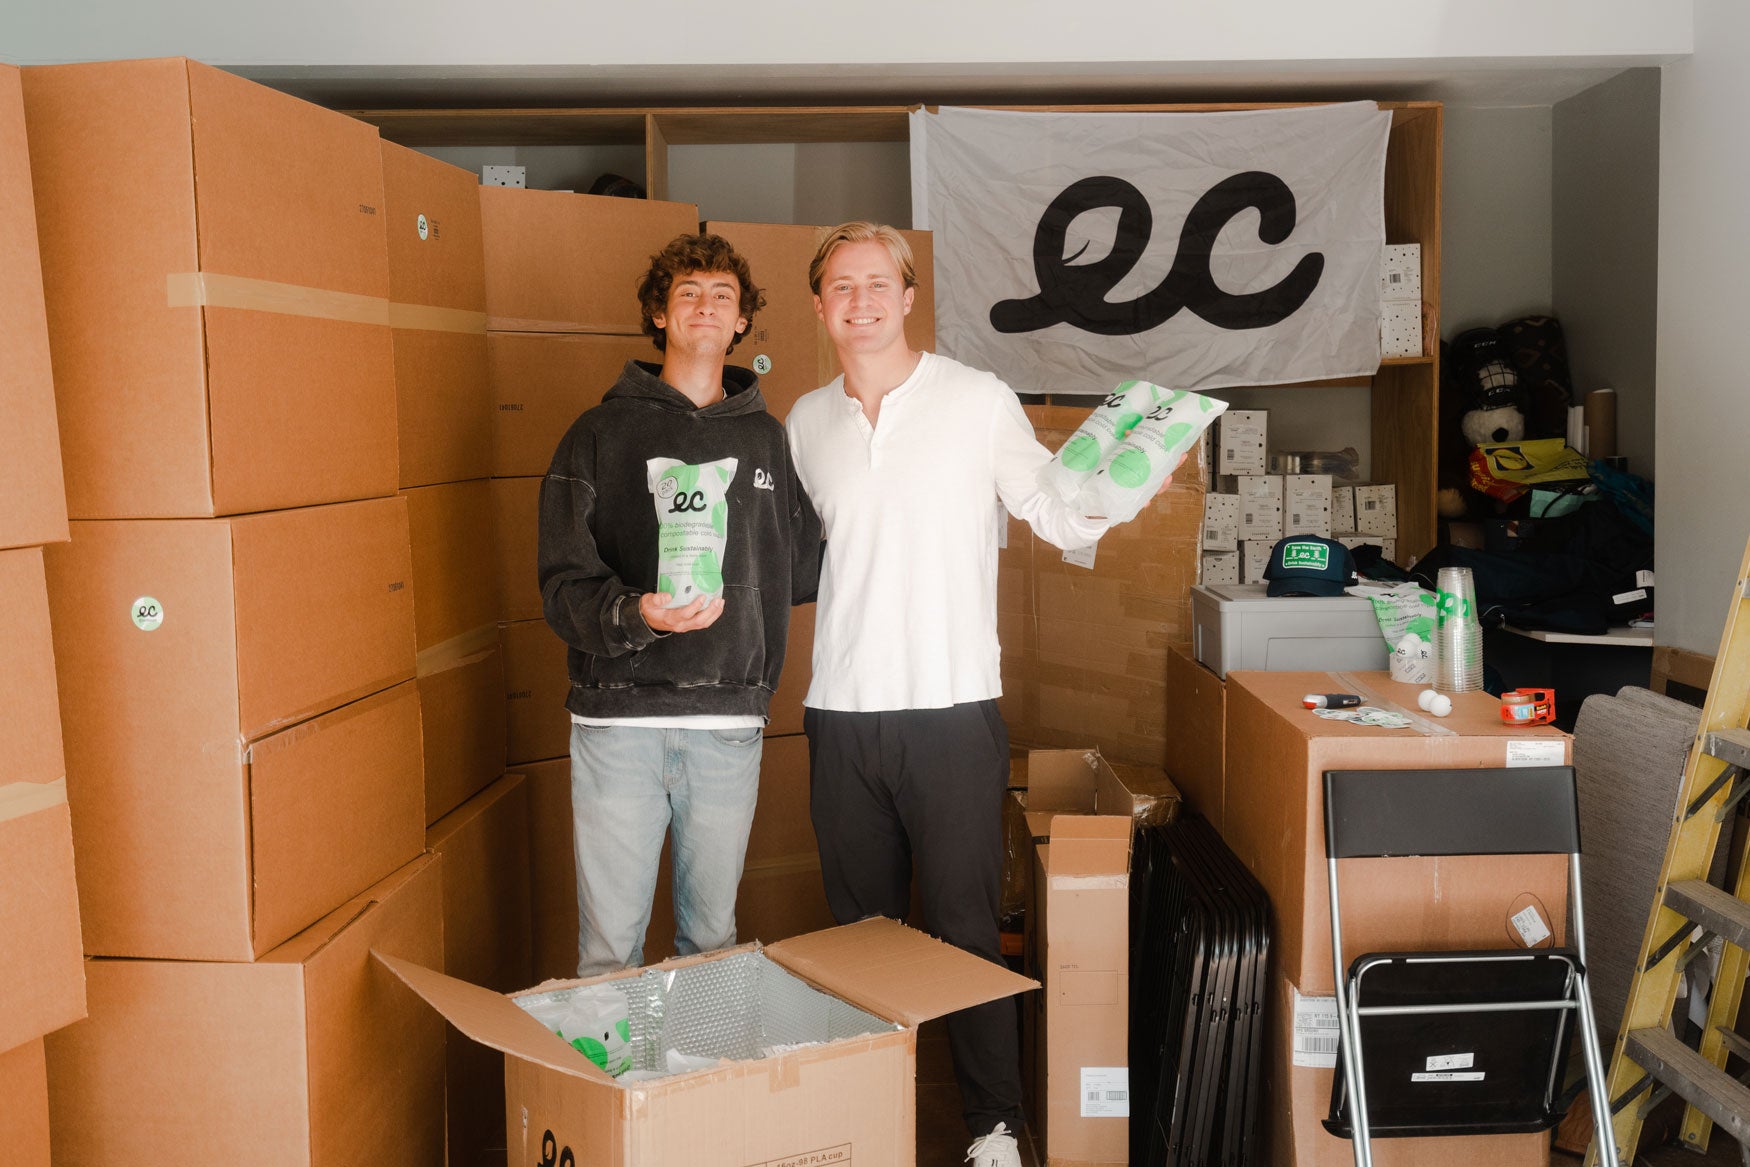 Earth Cups Founders In Garage Full Of Boxes of Earth Cups